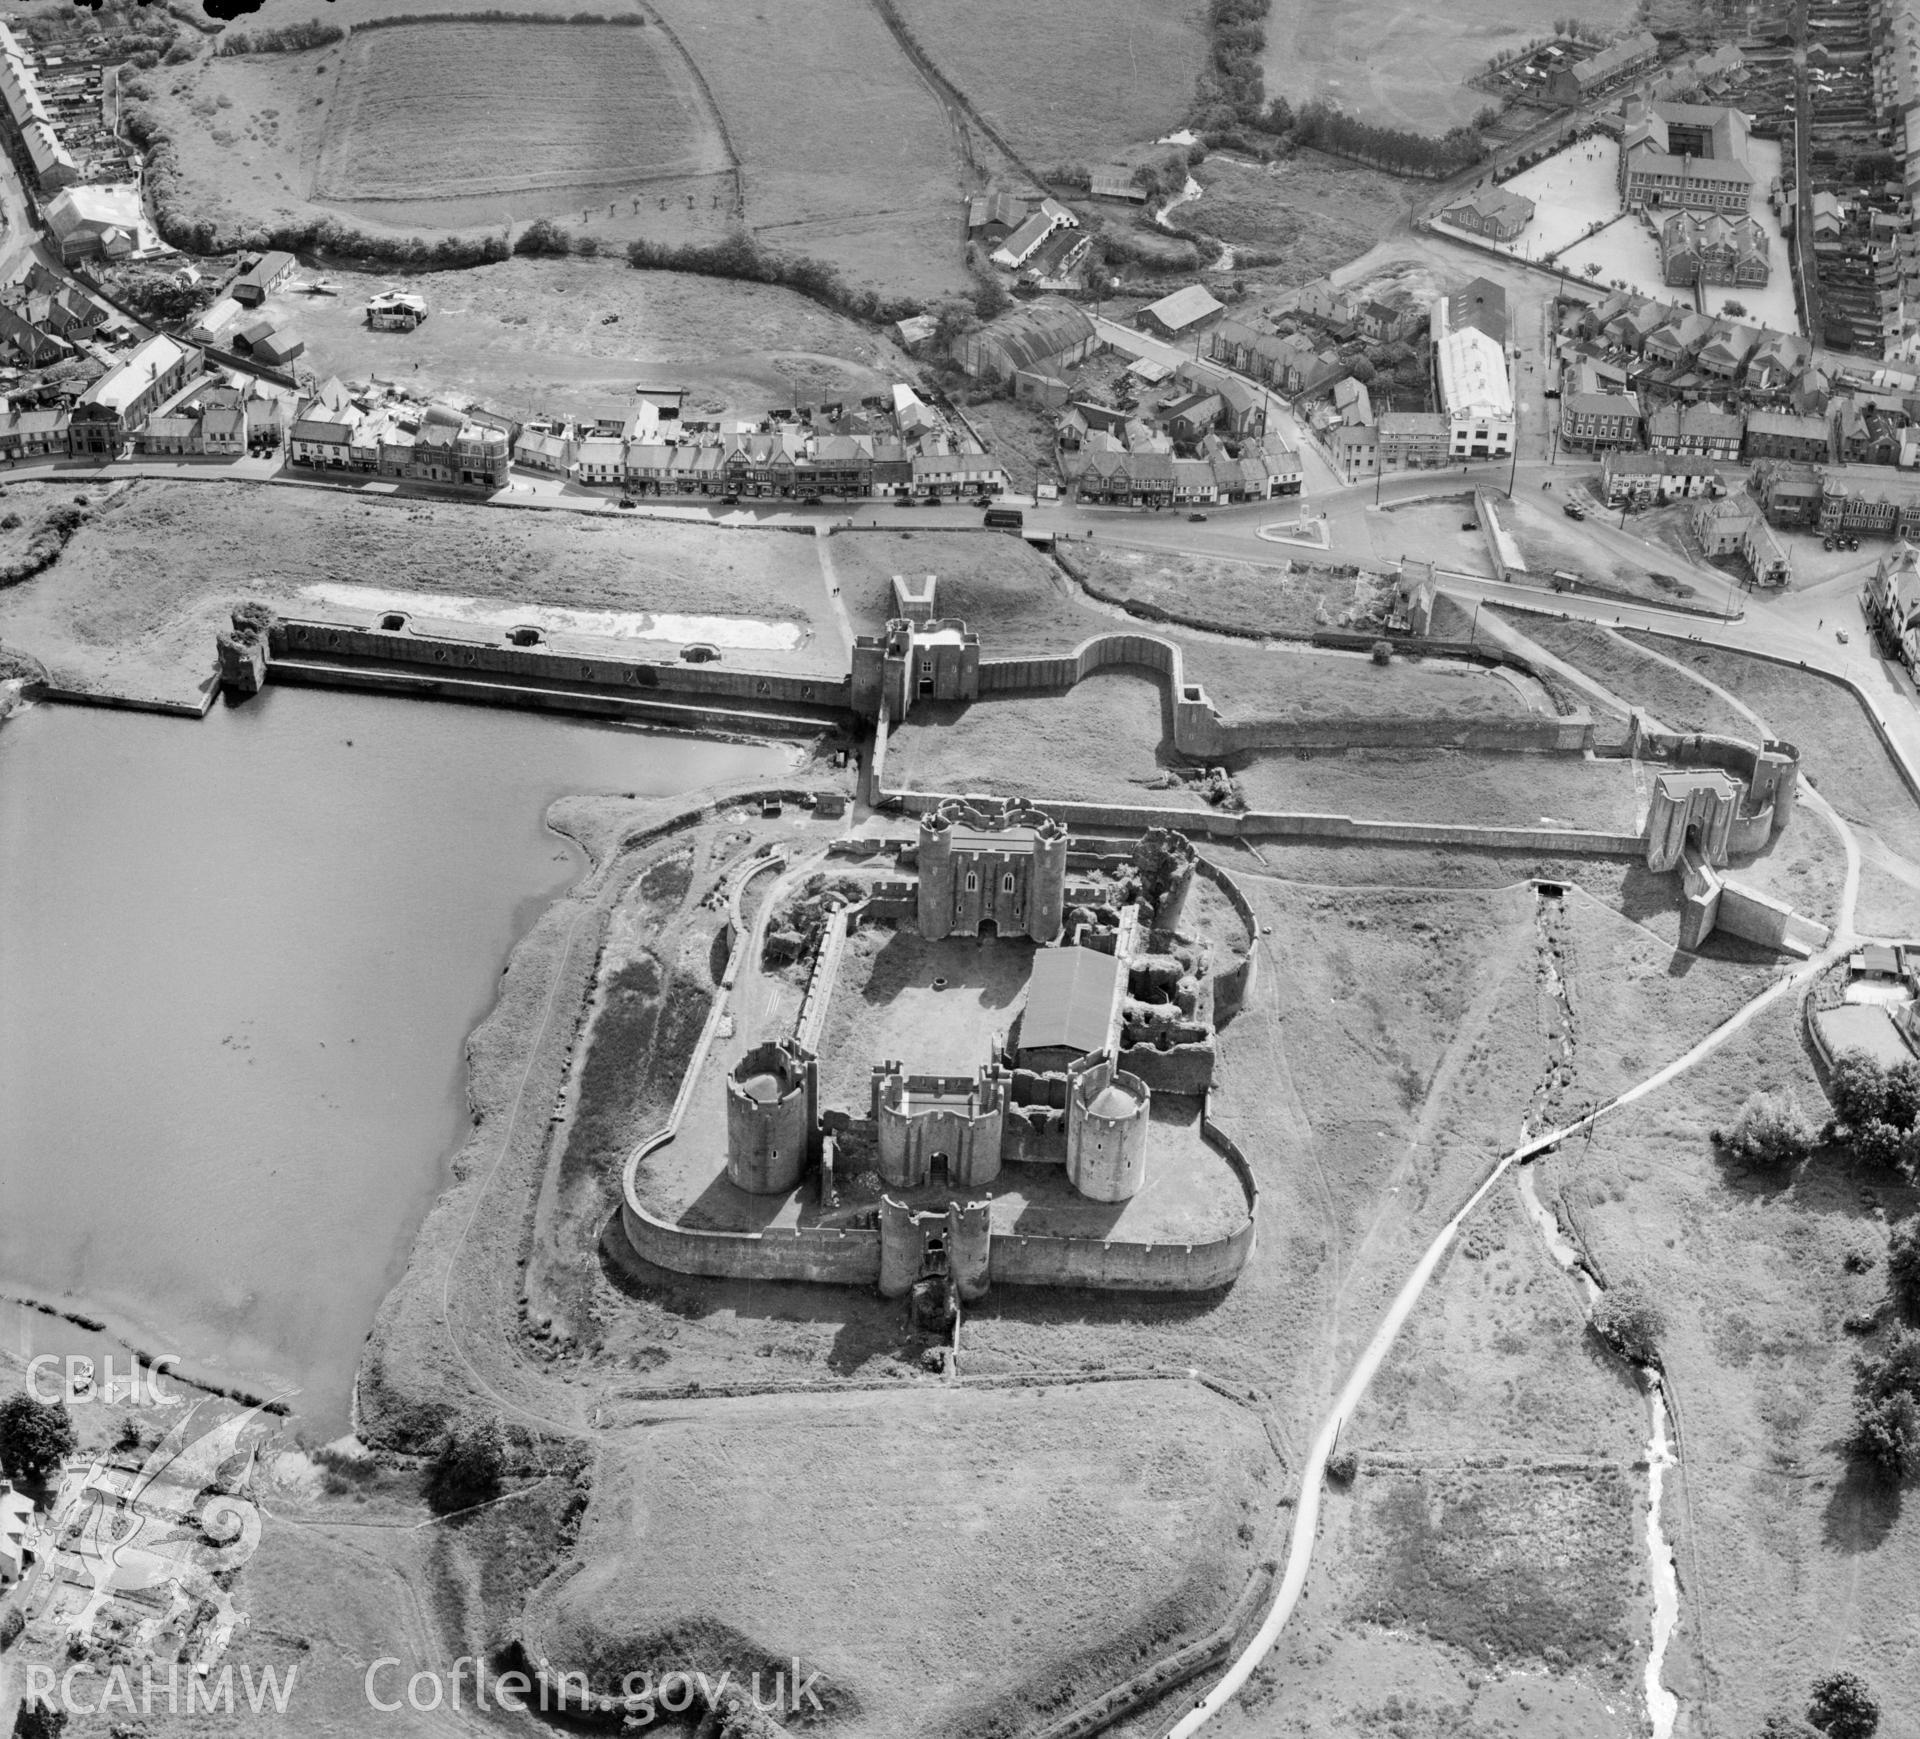 View of Caerphilly showing castle. Oblique aerial photograph, 5?" cut roll film.